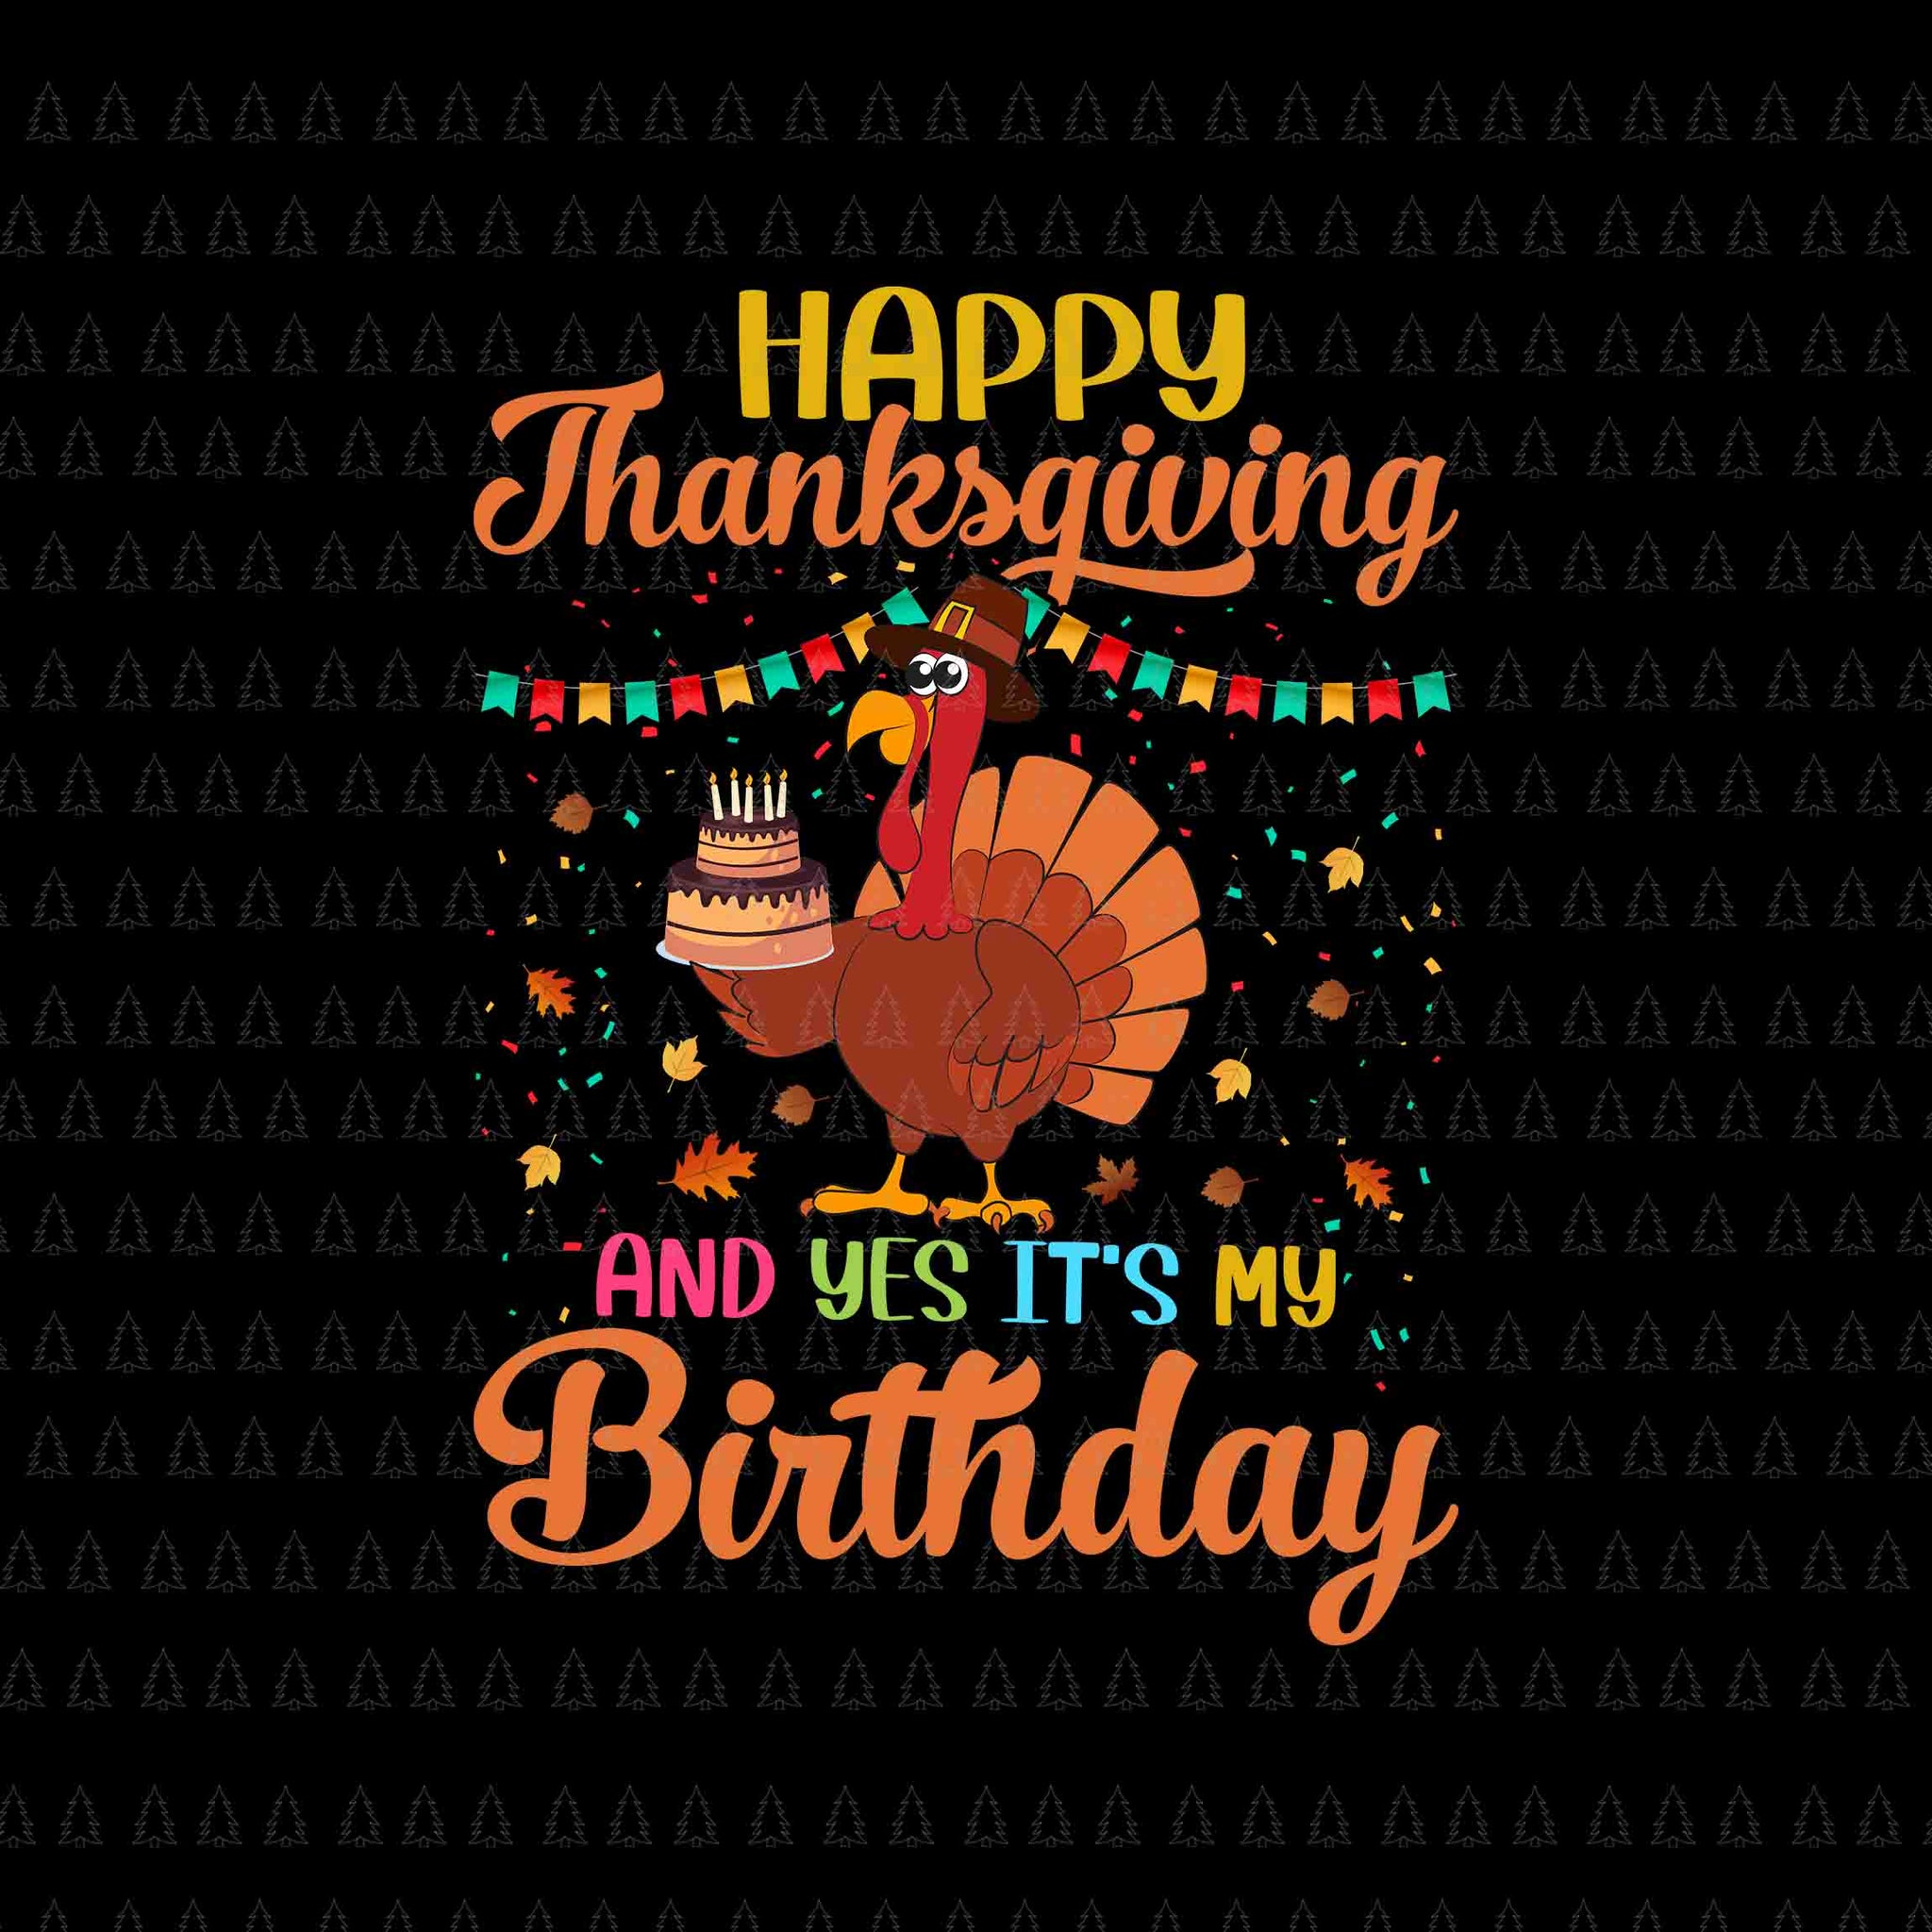 Happy Thanksgiving And Yes It's My Birthday Svg, Happy Thanksgiving Svg, Turkey Svg, Thanksgiving Svg, Thanksgiving Turkey Svg